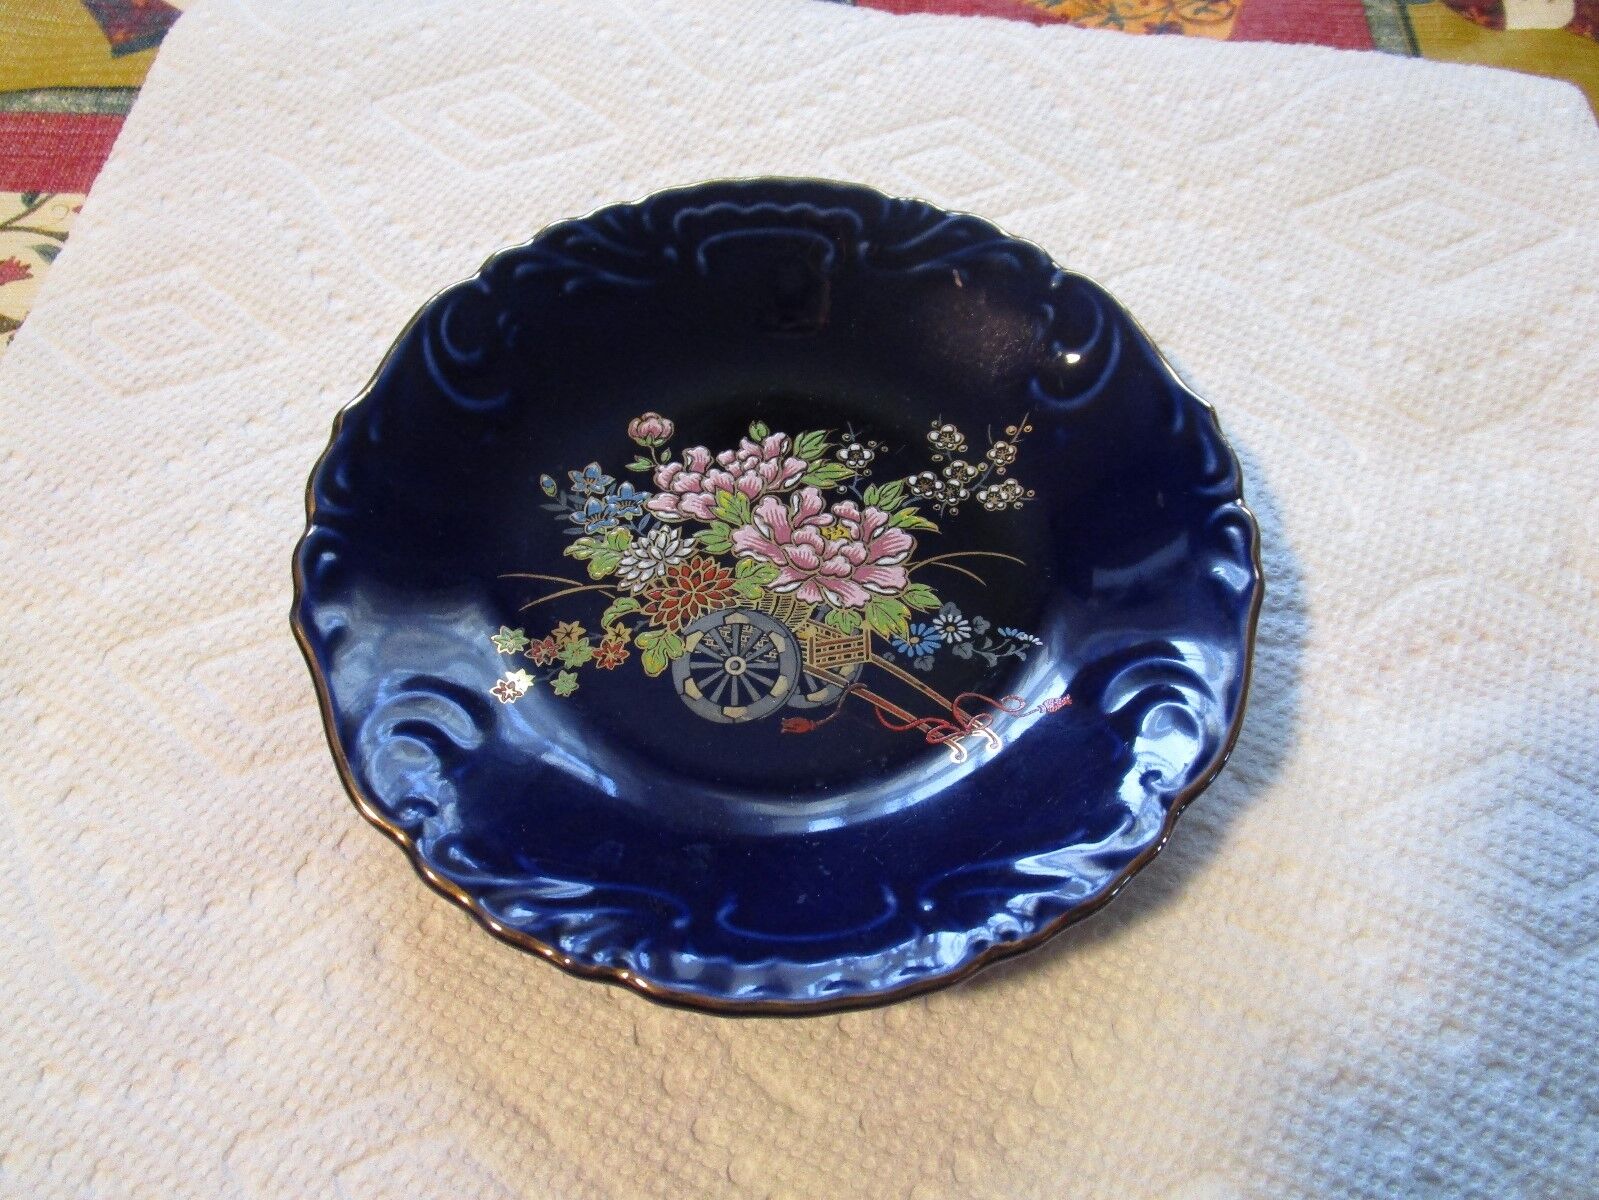 OREINTAL+LOVELY Cobalt Blue Porcelain Trinket Dish With [Wagon and Flowers]